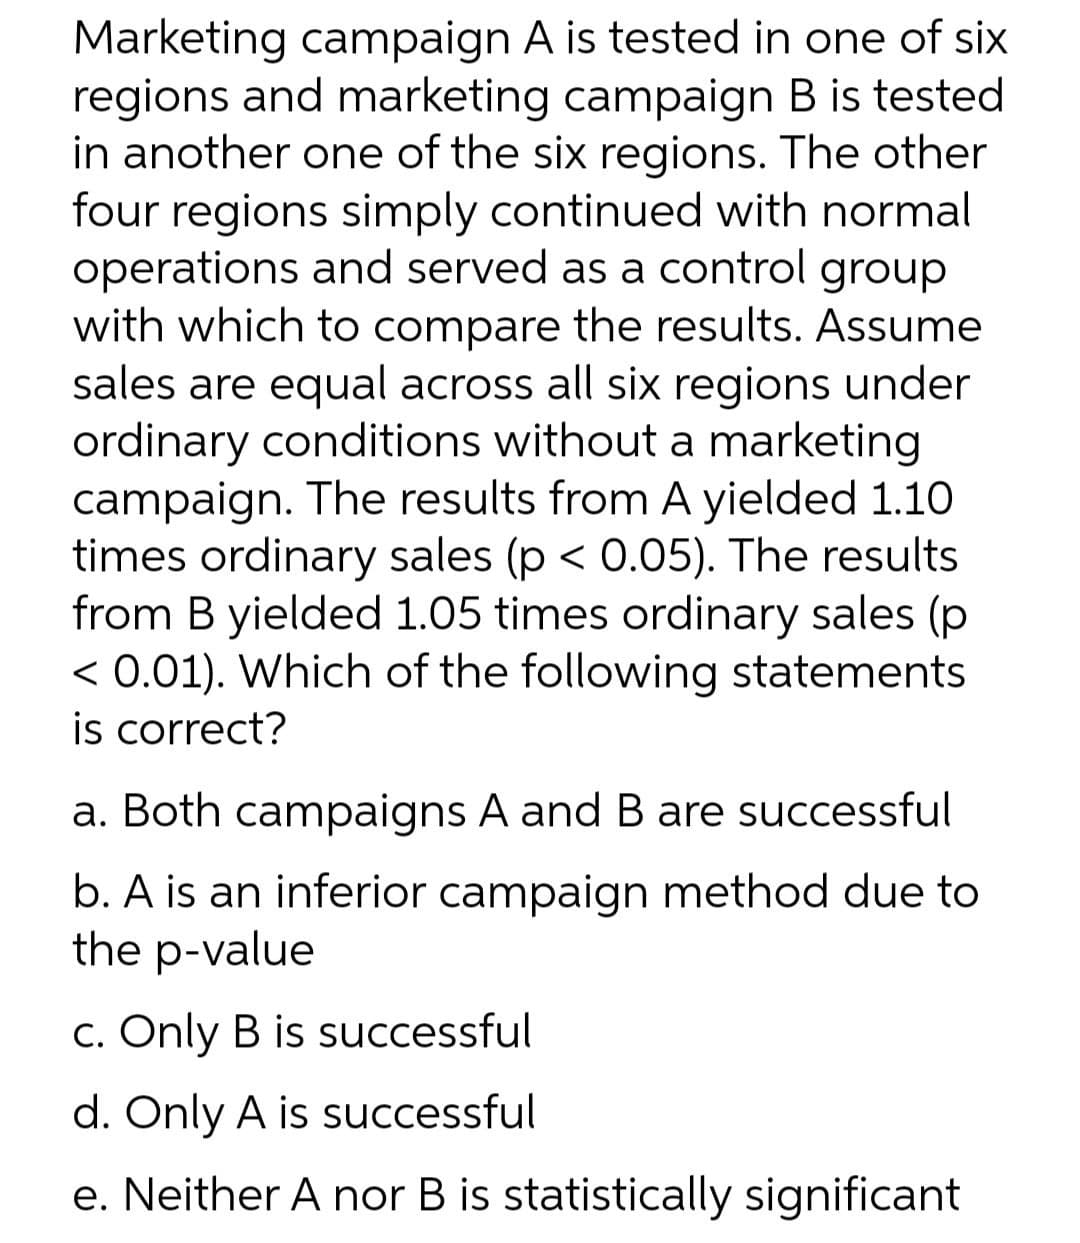 Marketing campaign A is tested in one of six
regions and marketing campaign B is tested
in another one of the six regions. The other
four regions simply continued with normal
operations and served as a control group
with which to compare the results. Assume
sales are equal across all six regions under
ordinary conditions without a marketing
campaign. The results from A yielded 1.10
times ordinary sales (p < 0.05). The results
from B yielded 1.05 times ordinary sales (p
< 0.01). Which of the following statements
is correct?
a. Both campaigns A and B are successful
b. A is an inferior campaign method due to
the p-value
C. Only B is successful
d. Only A is successful
e. Neither A nor B is statistically significant
